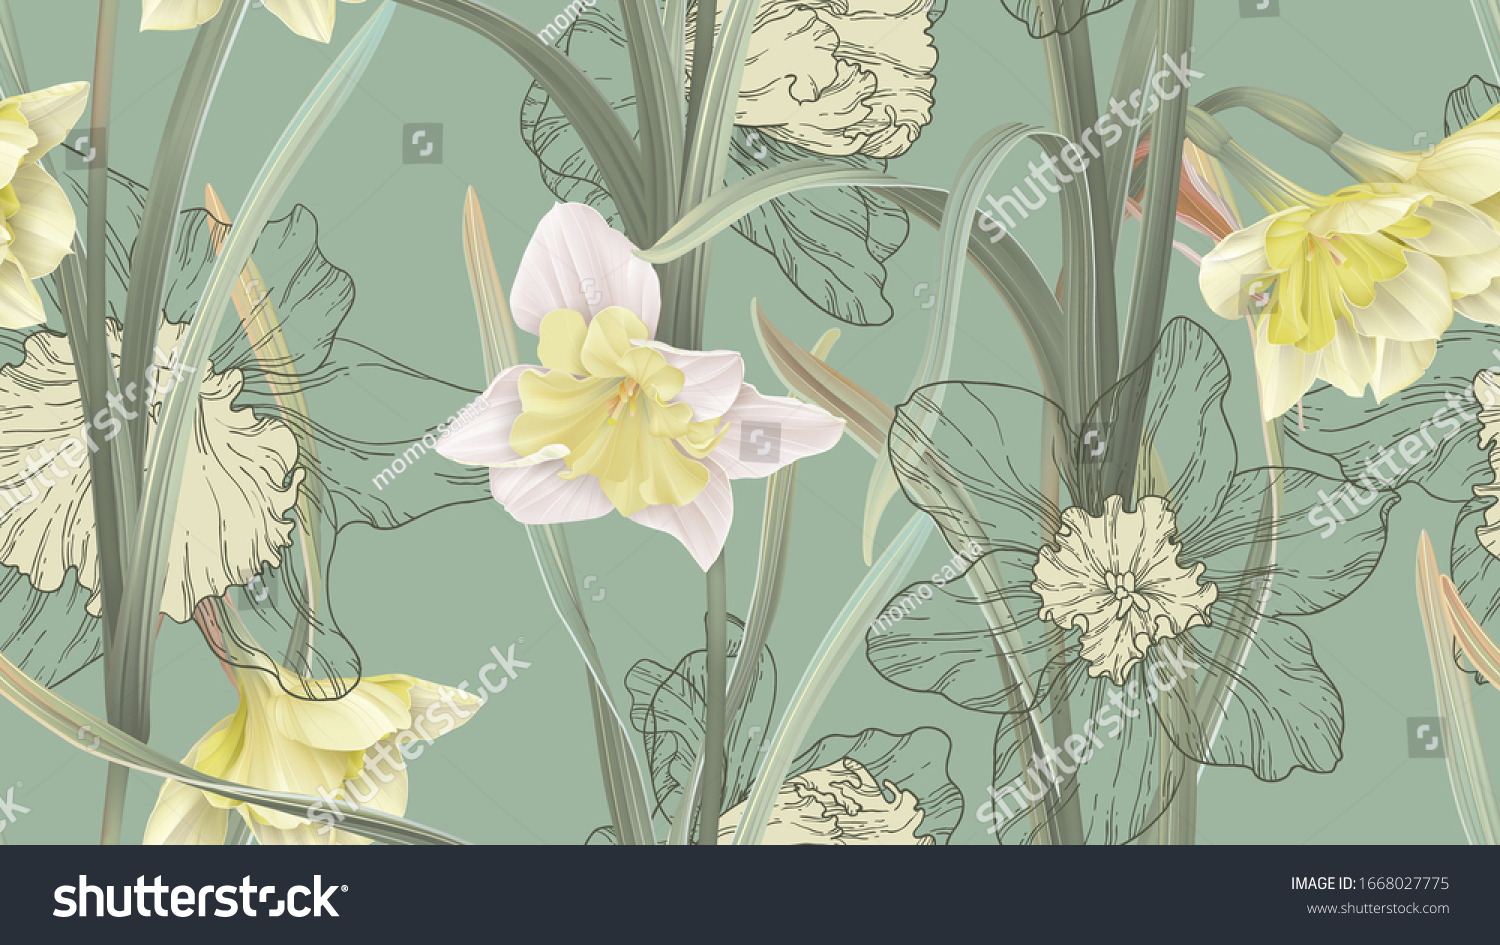 SVG of Floral seamless pattern, daffodil flowers with leaves on green svg